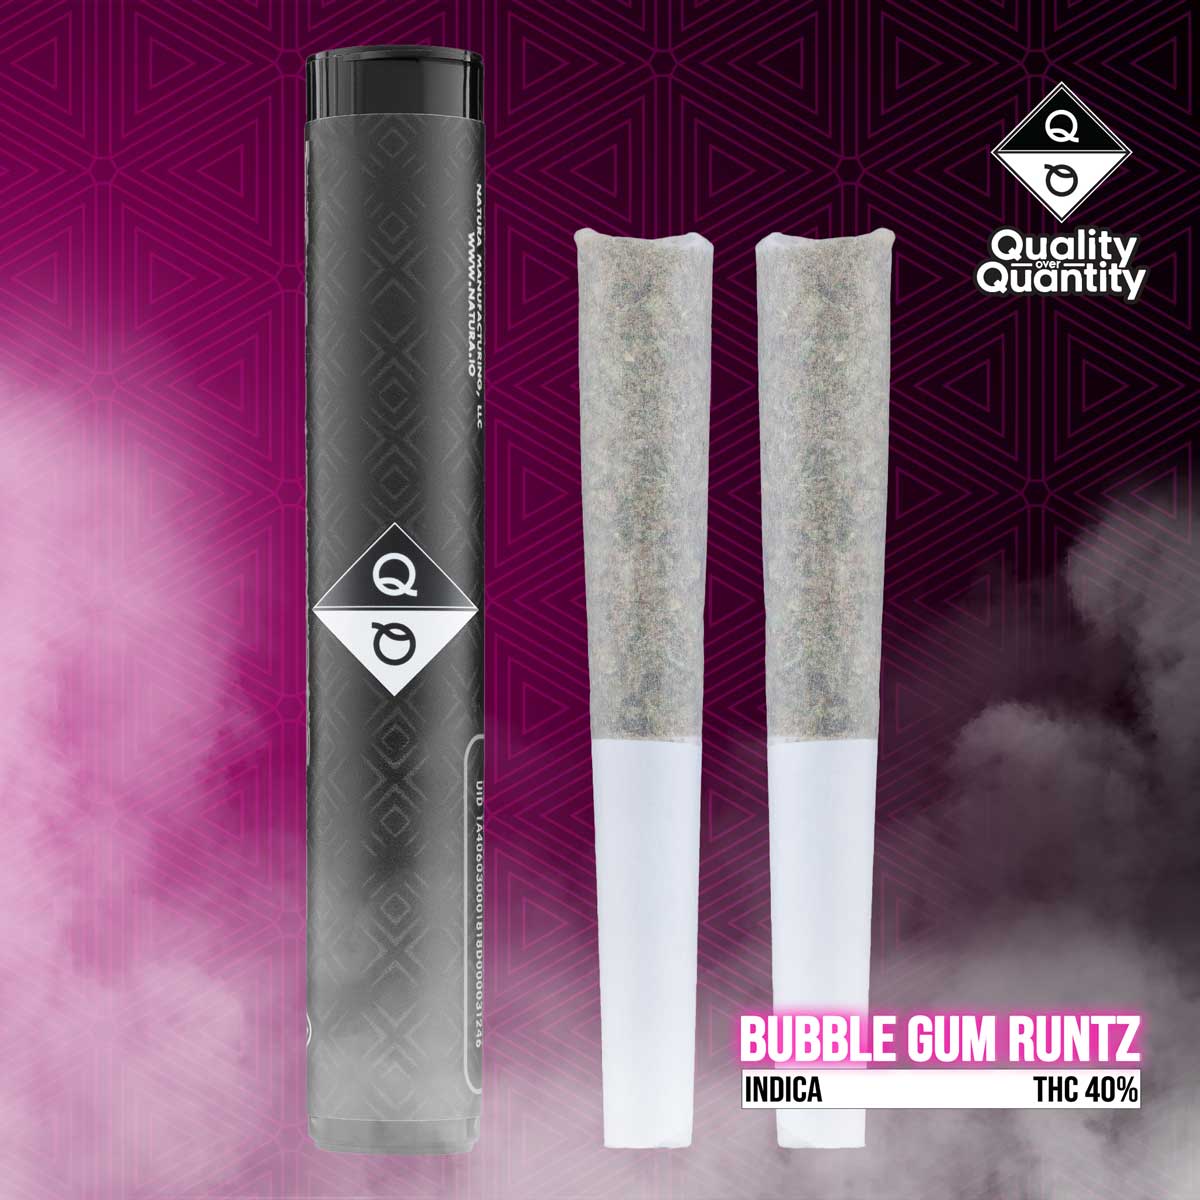 Quality Over Quantity - Bubble Gum Runtz Ice Water Hash Pre-roll Pack